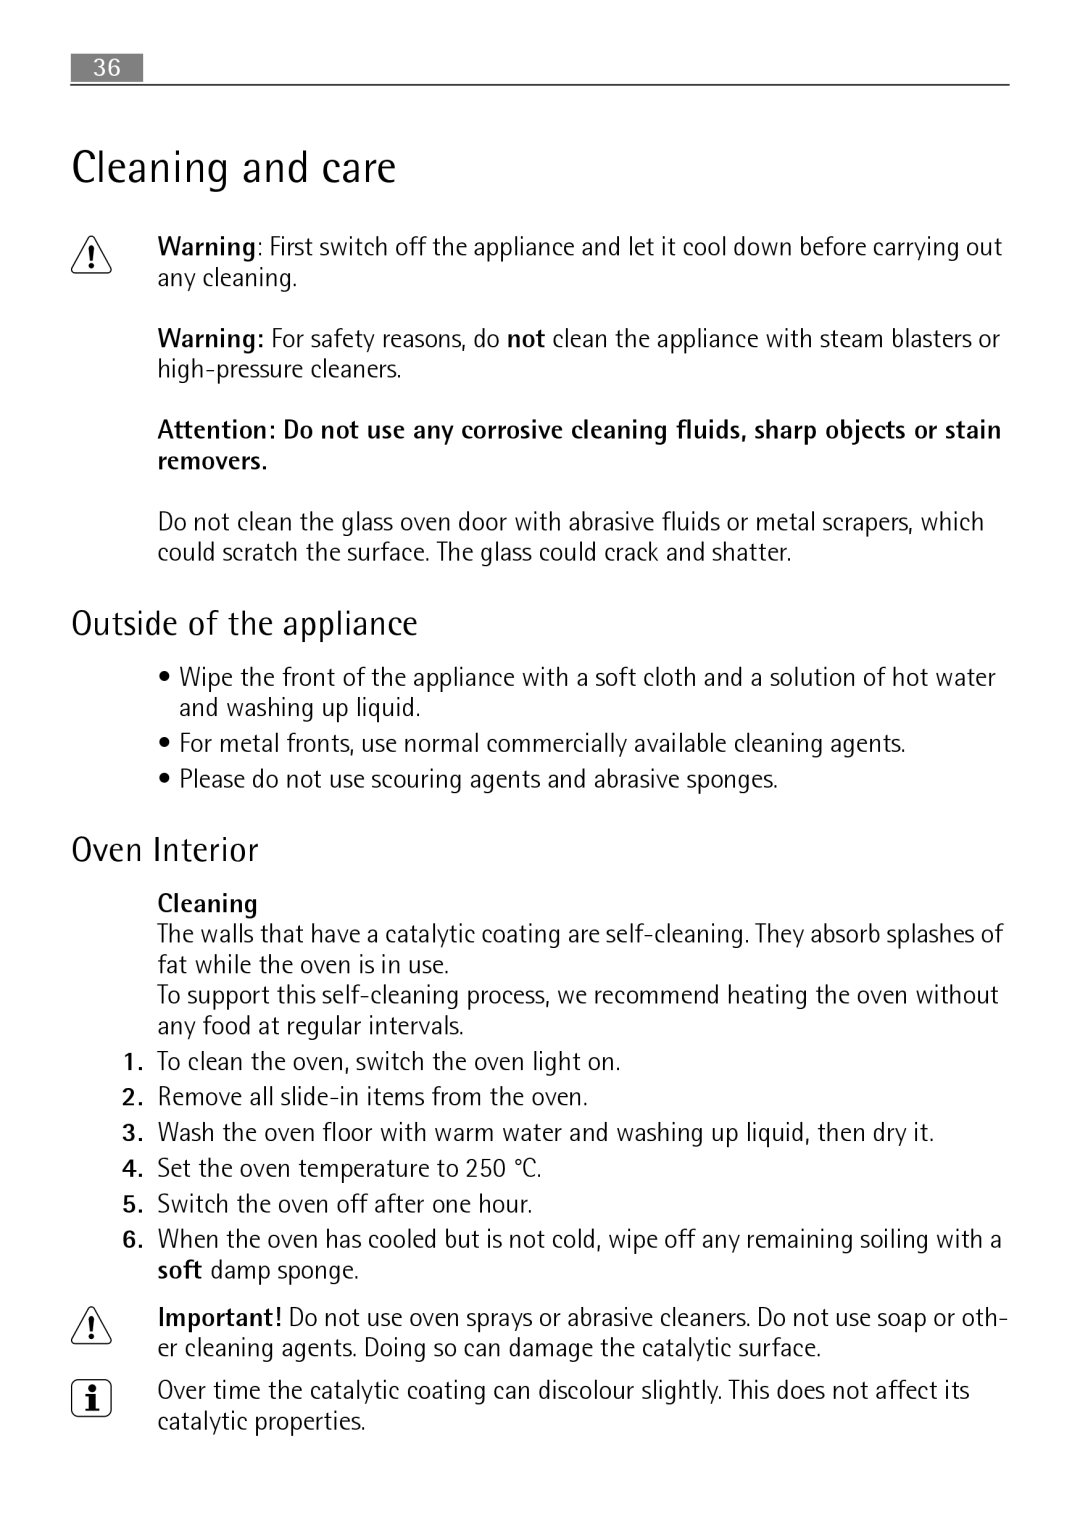 Electrolux B3101-5 user manual Cleaning and care, Outside of the appliance, Oven Interior 